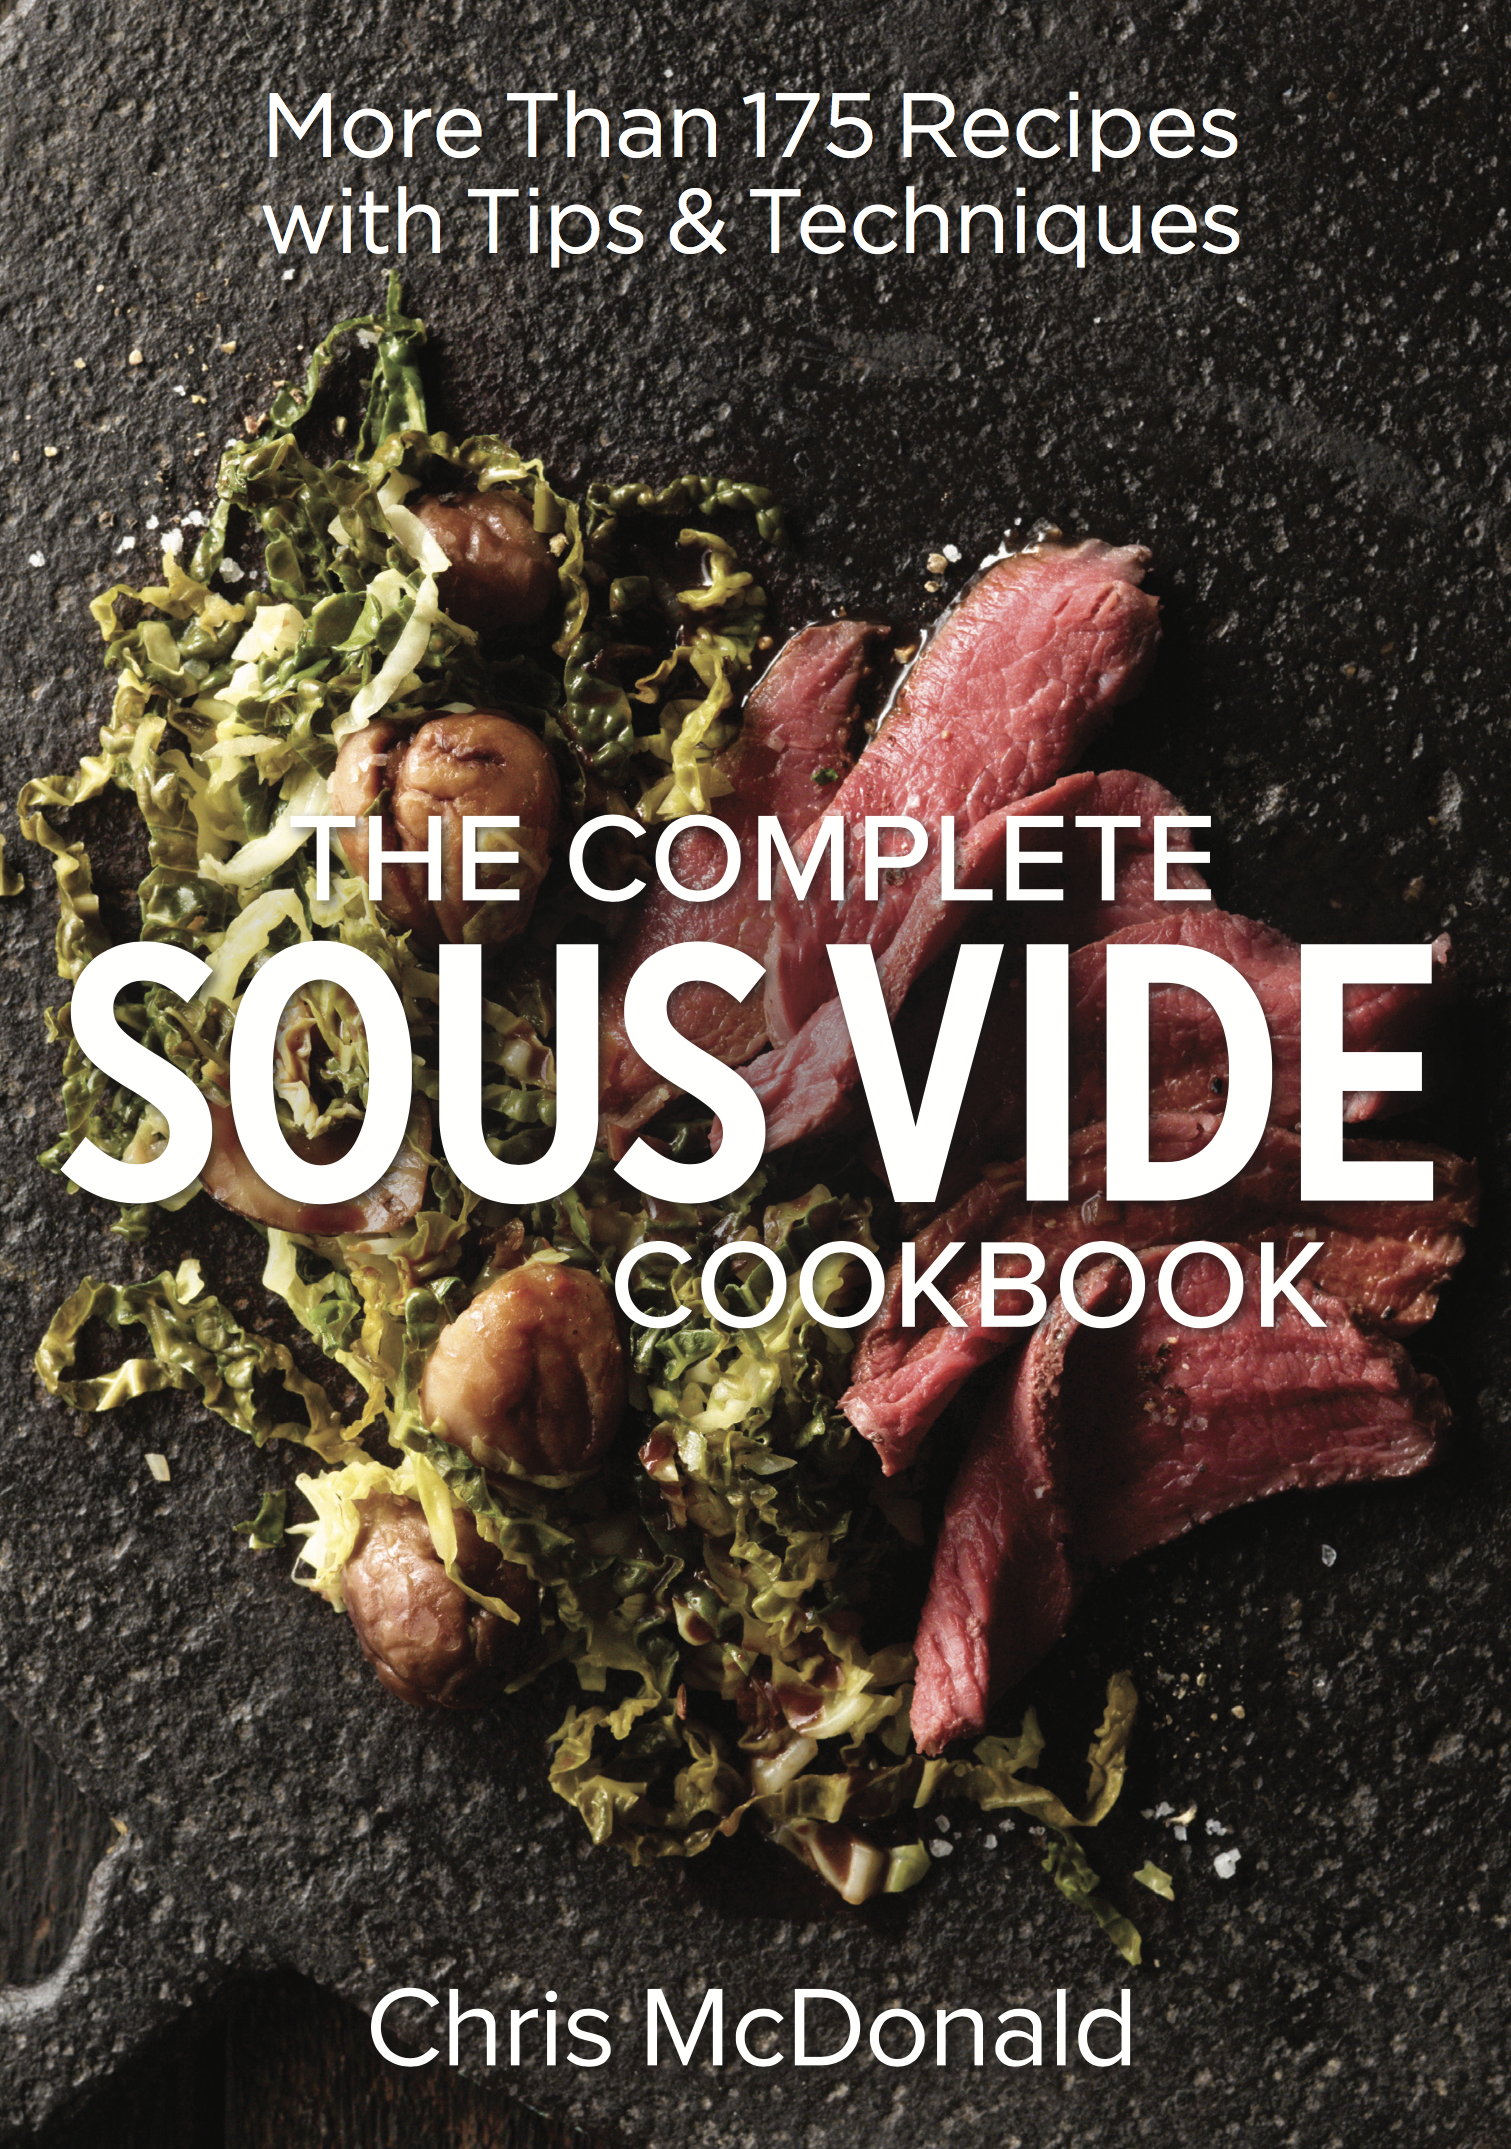 Book Review : The Complete Sous Vide Cookbook by Chris McDonald